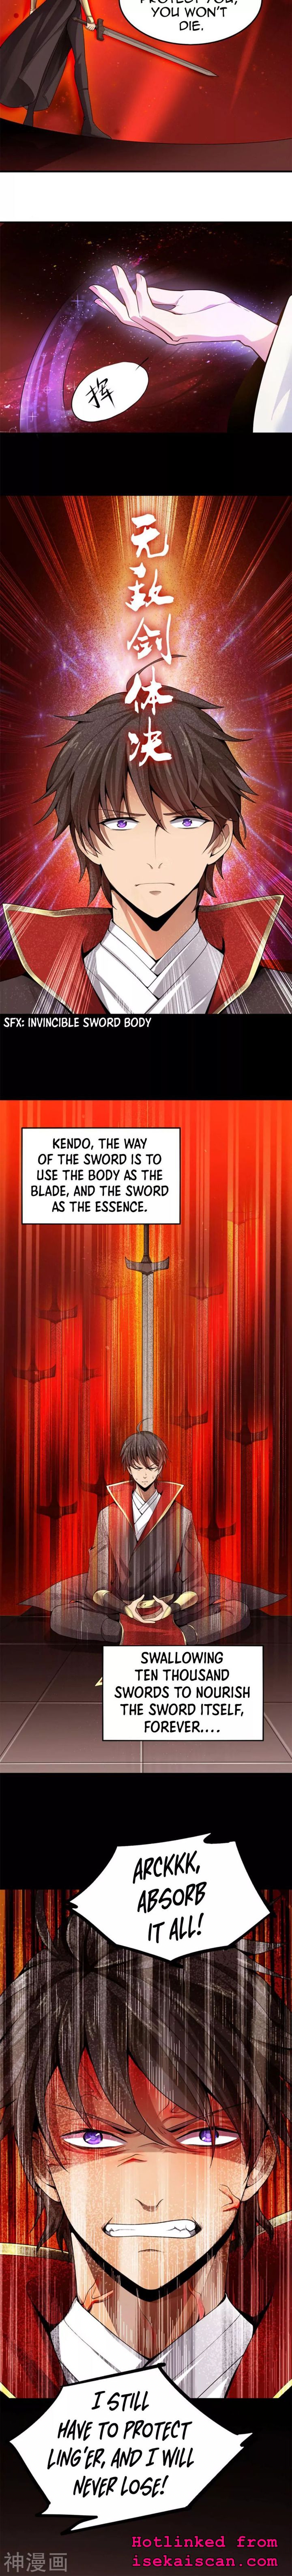 One Sword Reigns Supreme 2 6